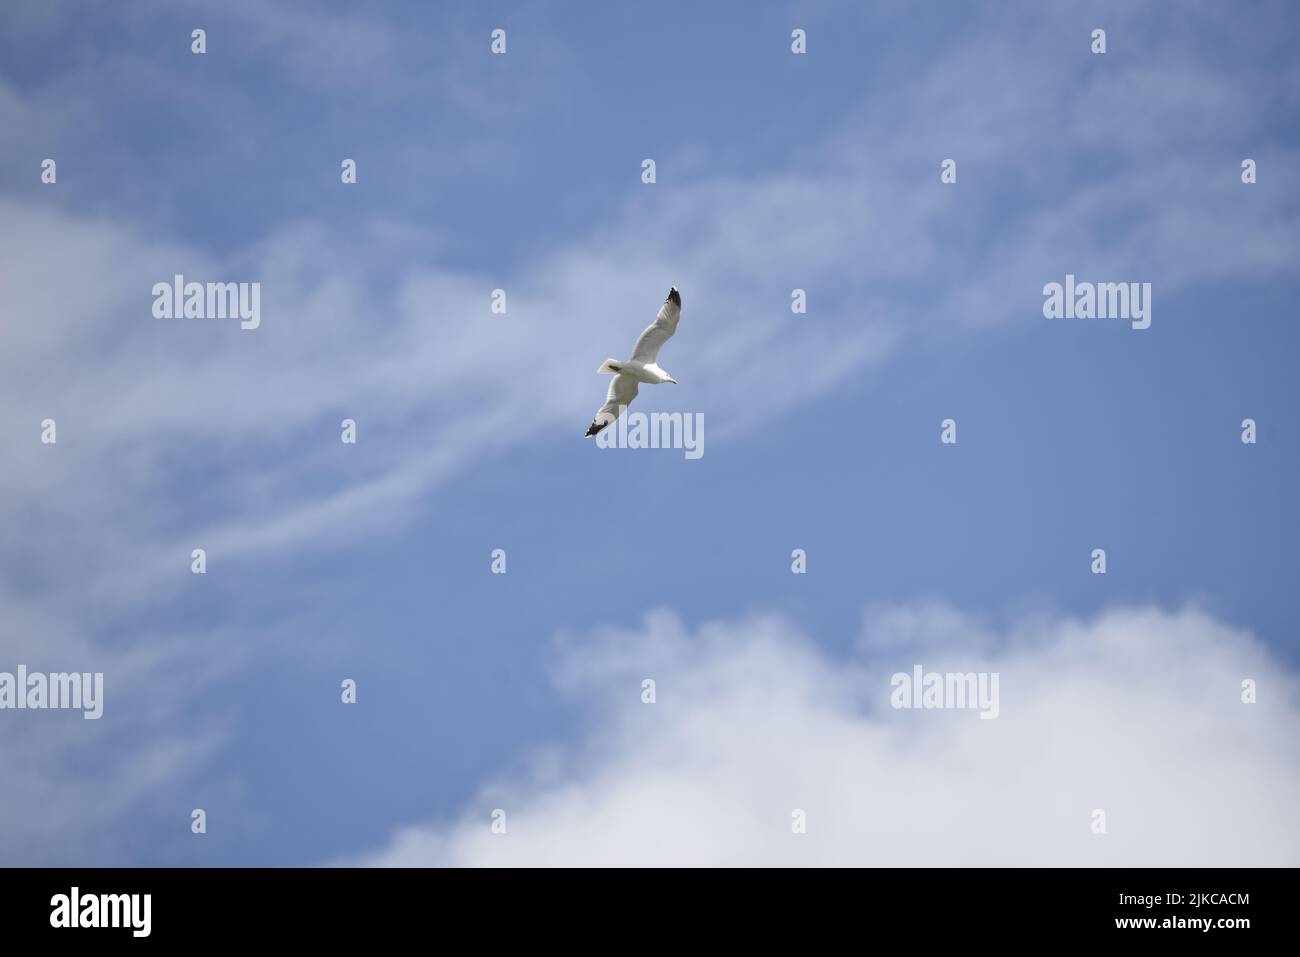 European Herring Gull (Larus argentatus) Flying Left to Right, Top Middle of Image, Against a Blue Sky with Light Cloud, with Copy Space Underneath Stock Photo